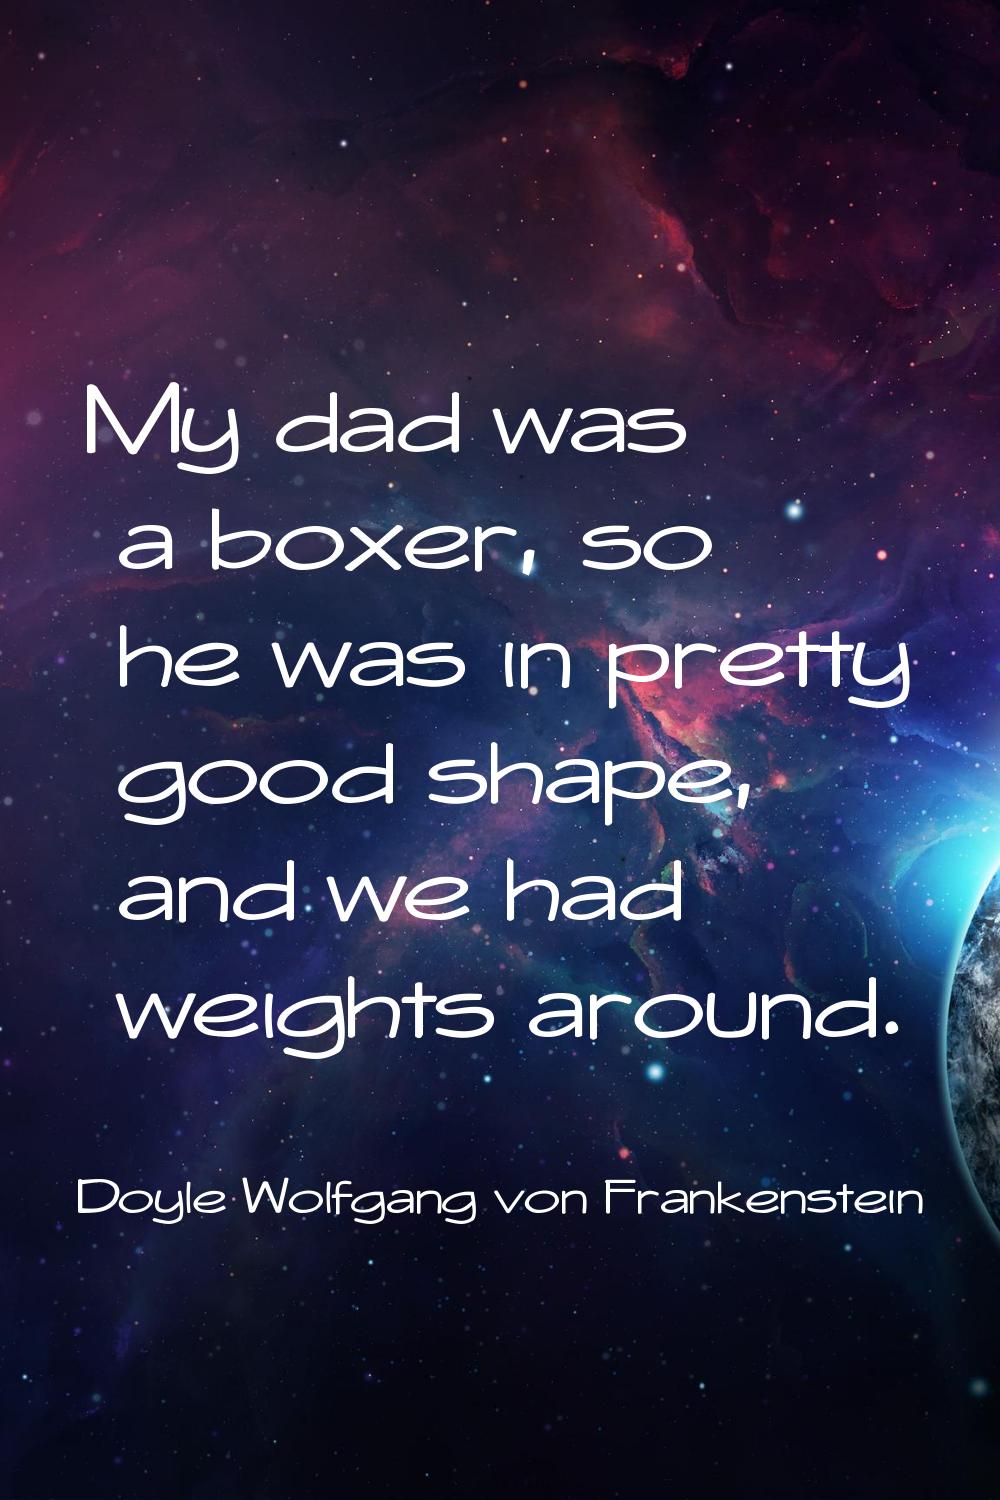 My dad was a boxer, so he was in pretty good shape, and we had weights around.